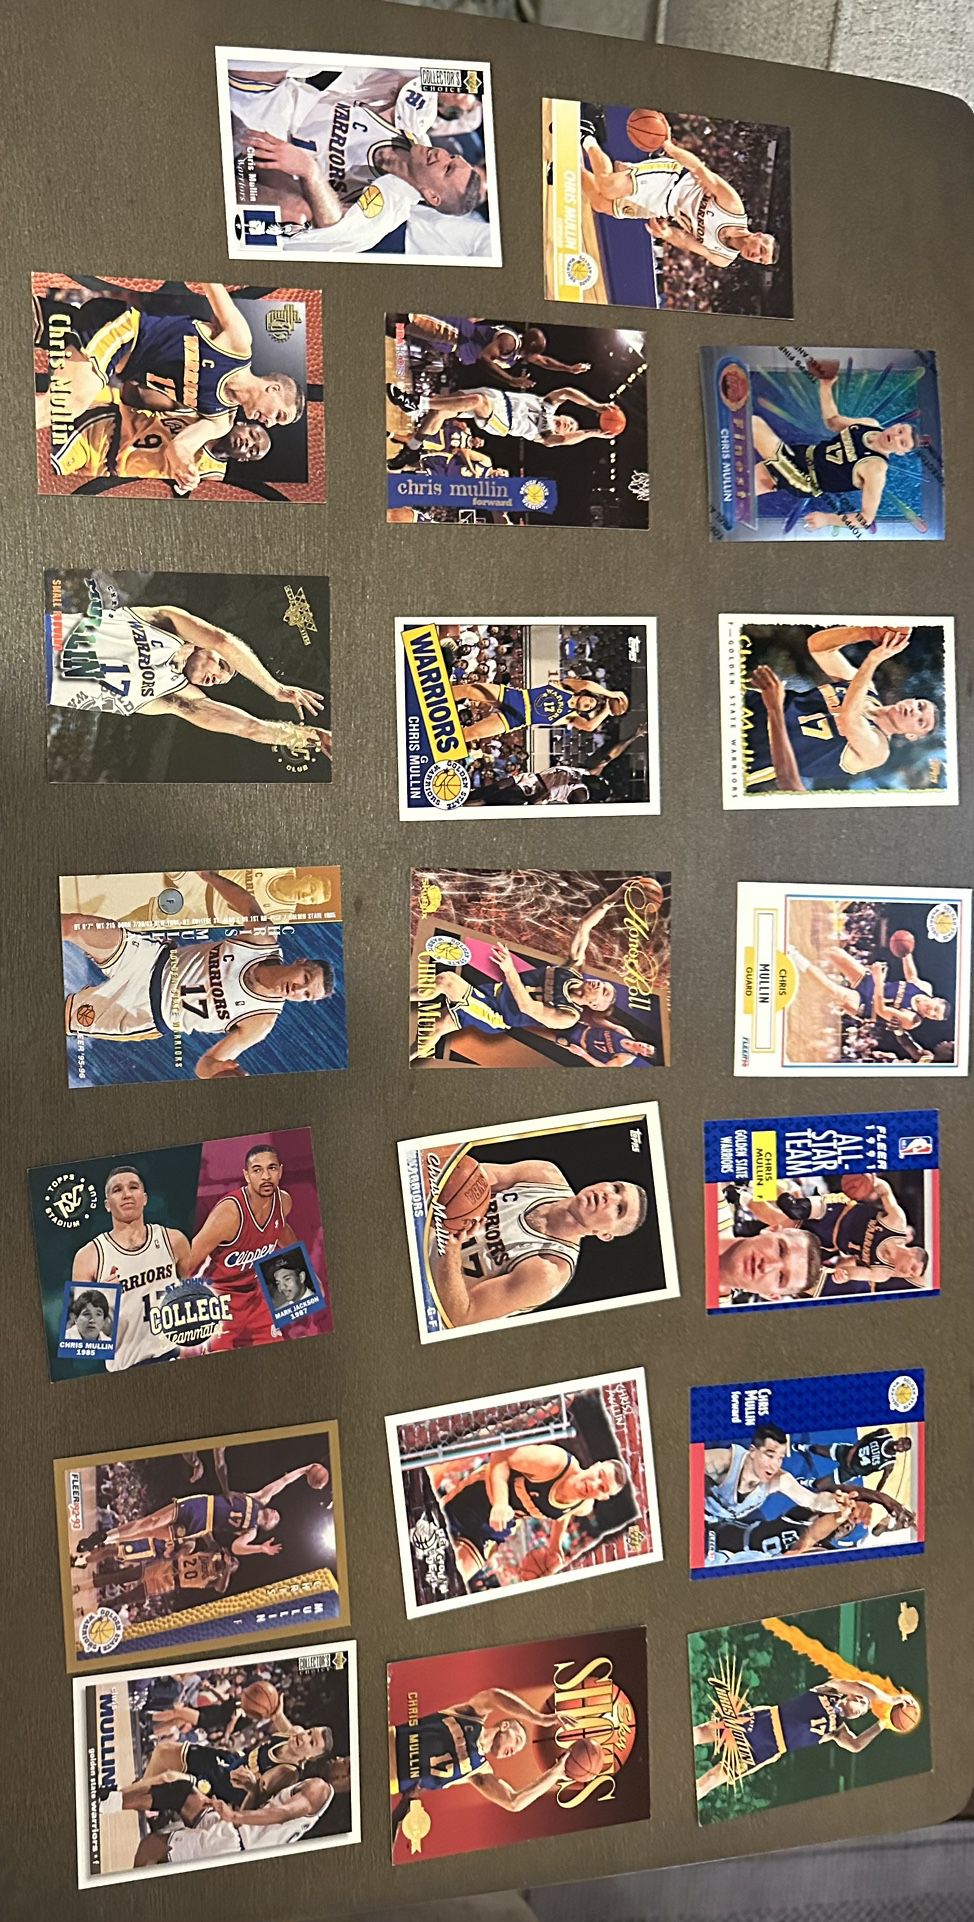 Steal Of The Century-20 Basketball Card Lot Of Chris Mullin